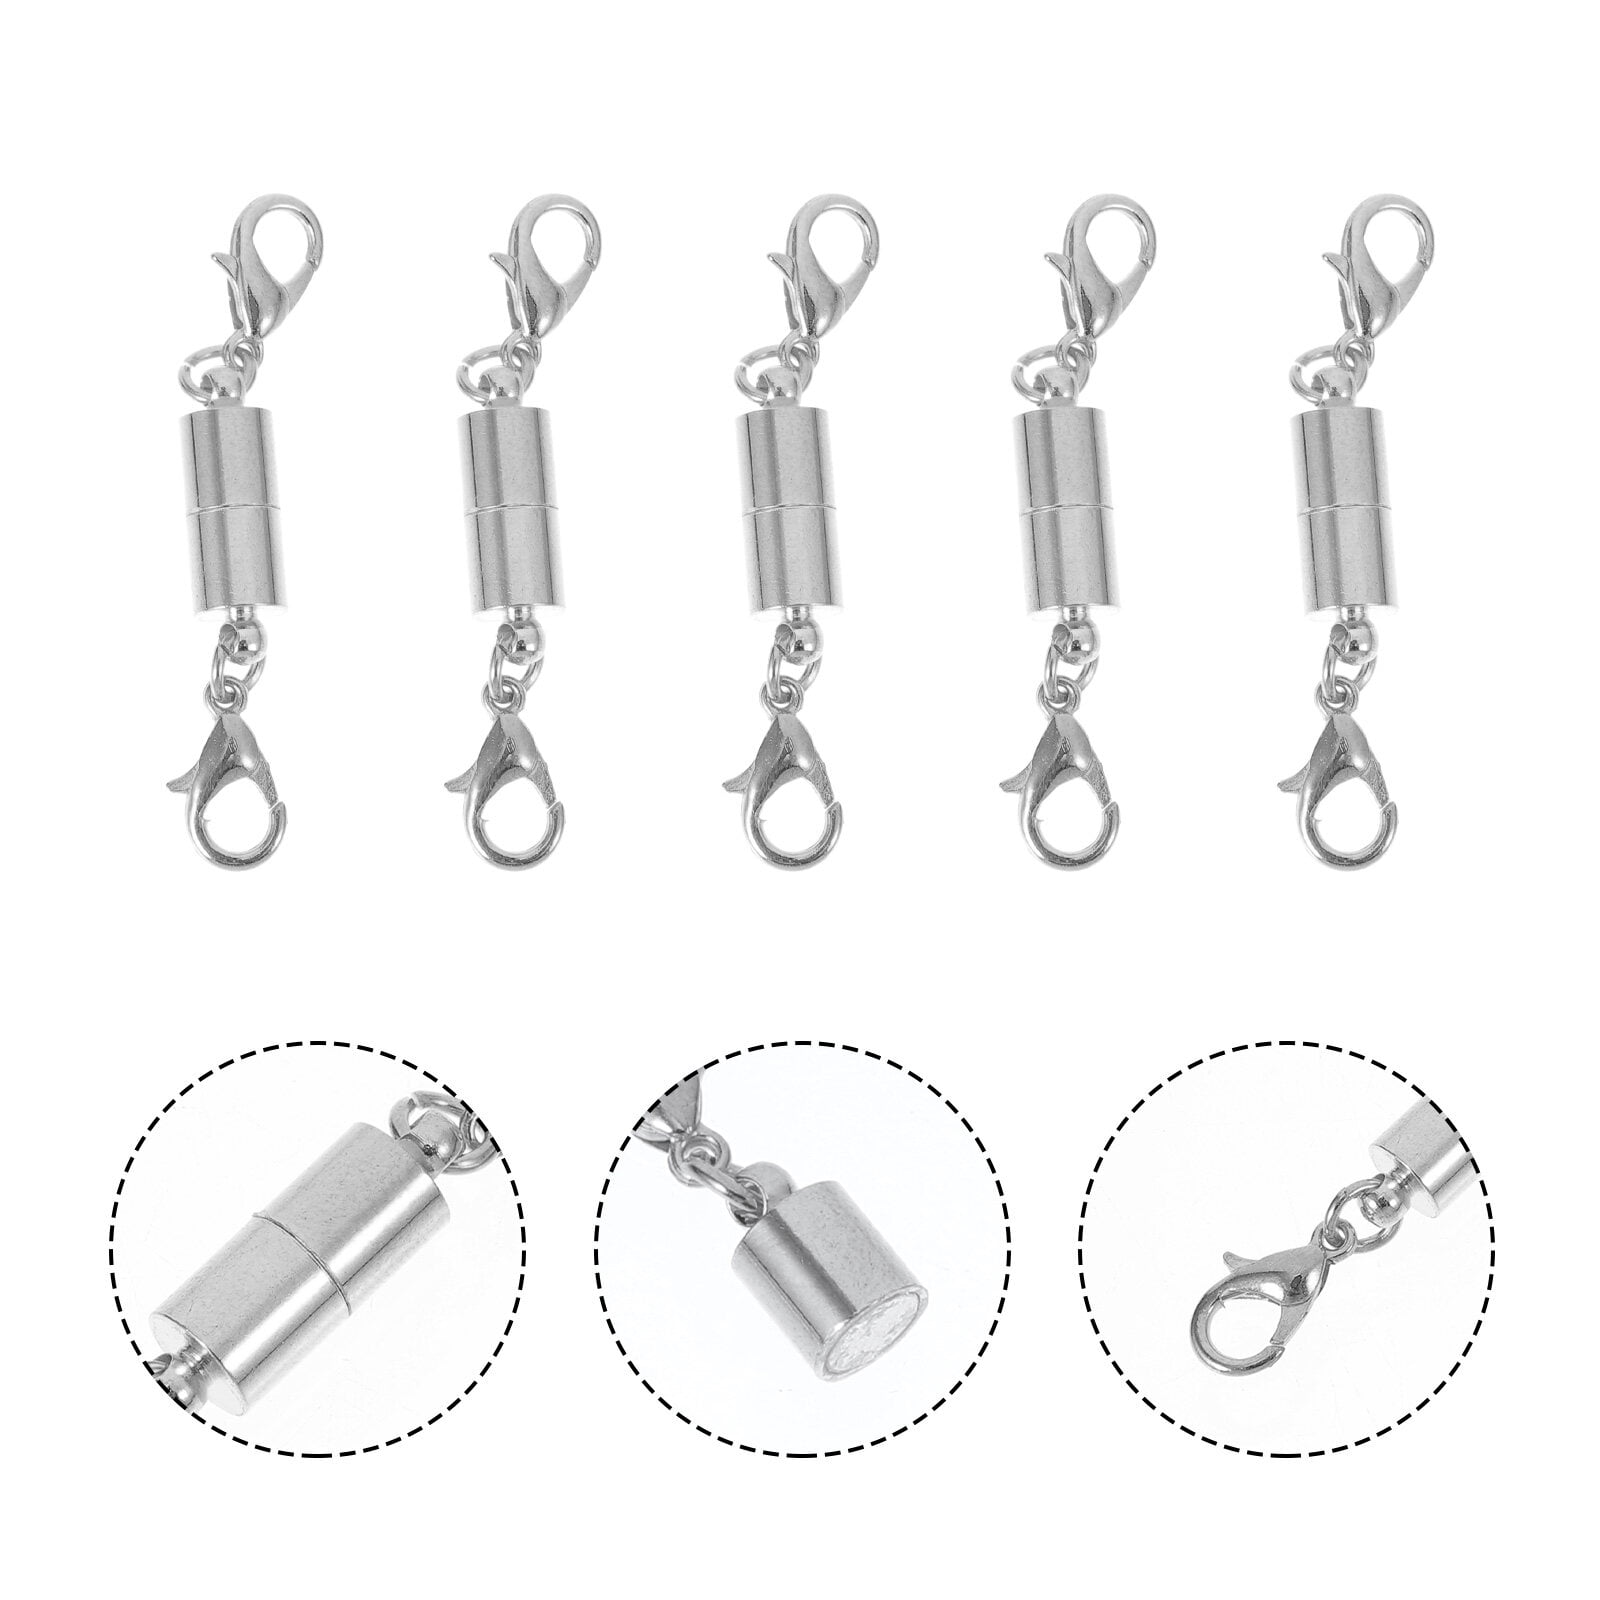  KONMAY 10 Sets 6.0mmx3.0mm Tiny Magnetic Jewelry Clasps for  Bracelet Making, Mixed